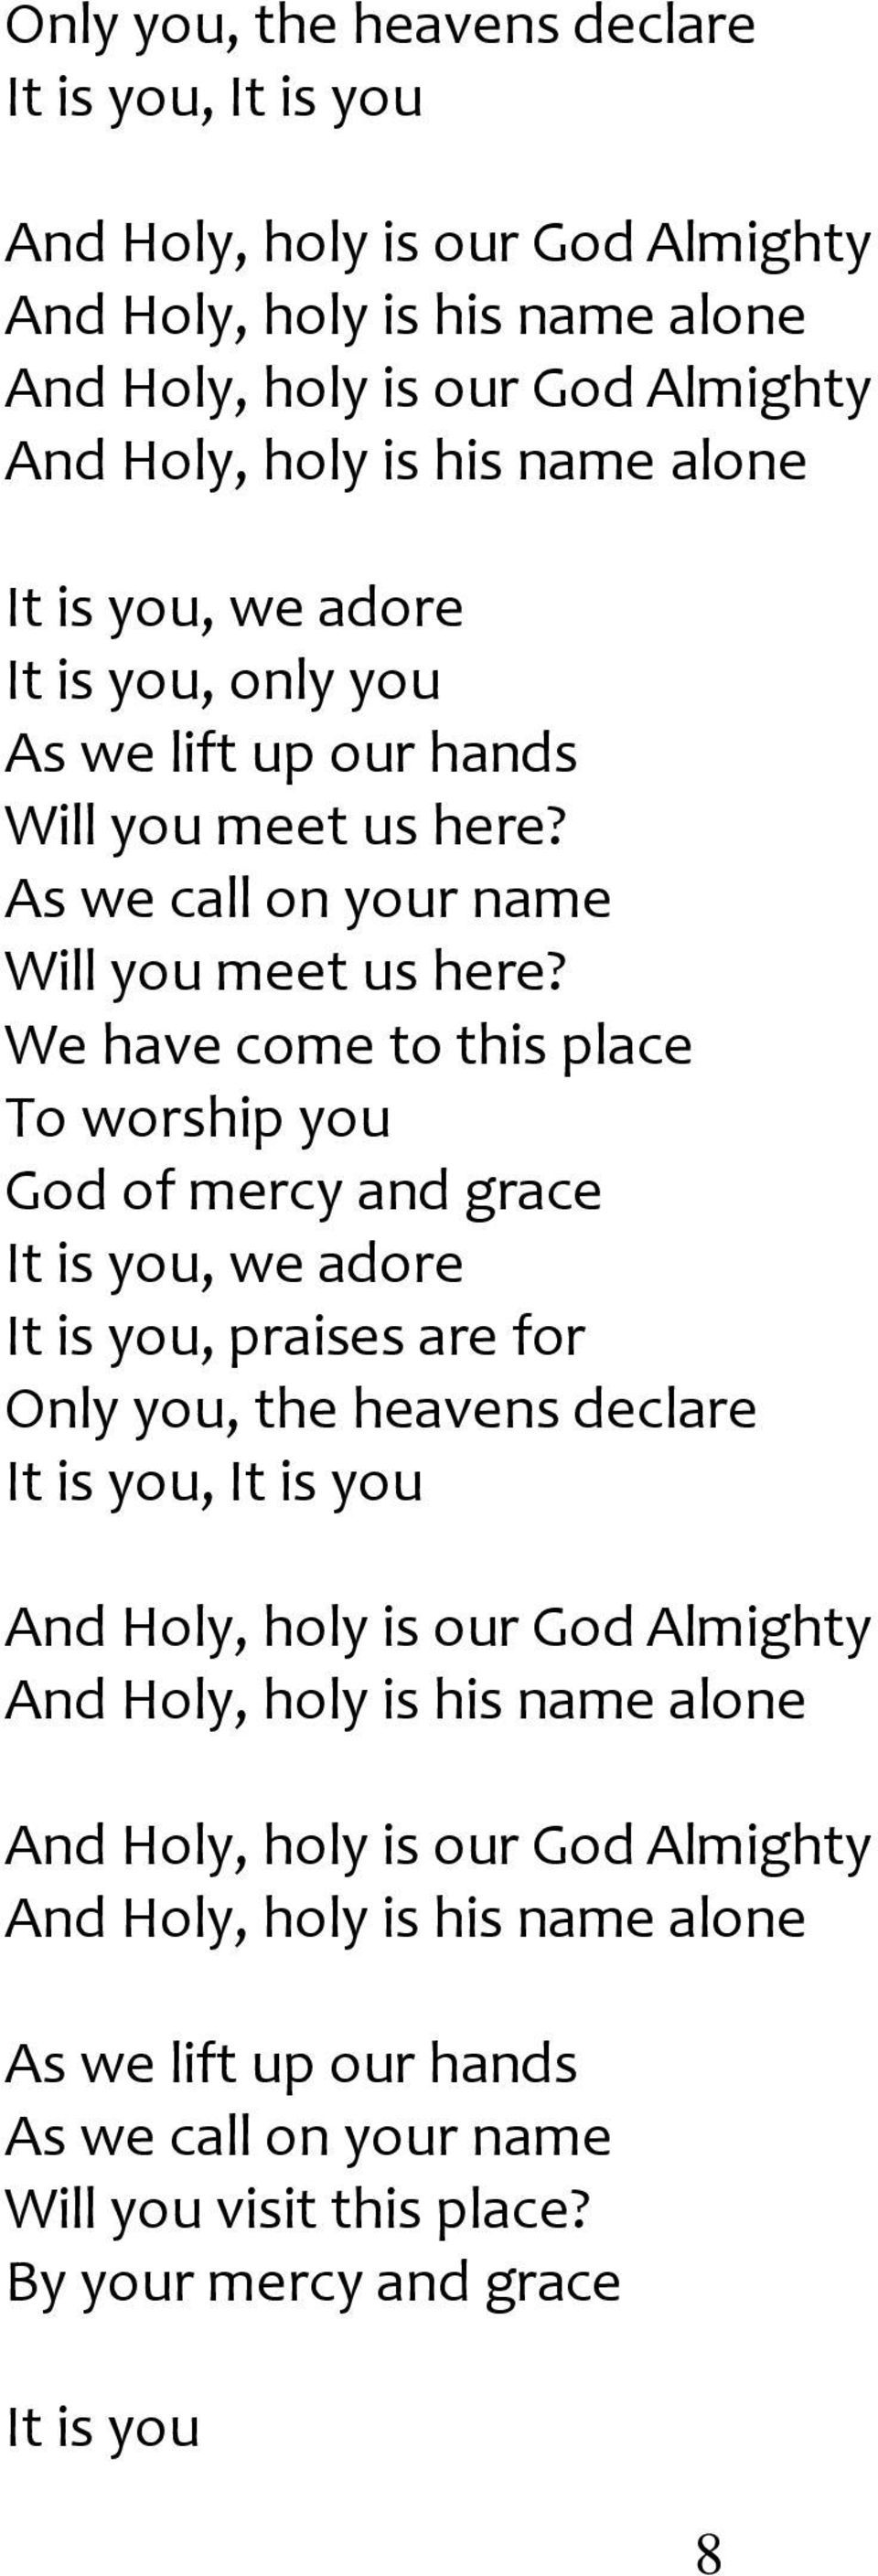 We have come to this place To worship you God of mercy and grace It is you, we adore It is you, praises are for  alone As we lift up our hands As we call on your name Will you visit